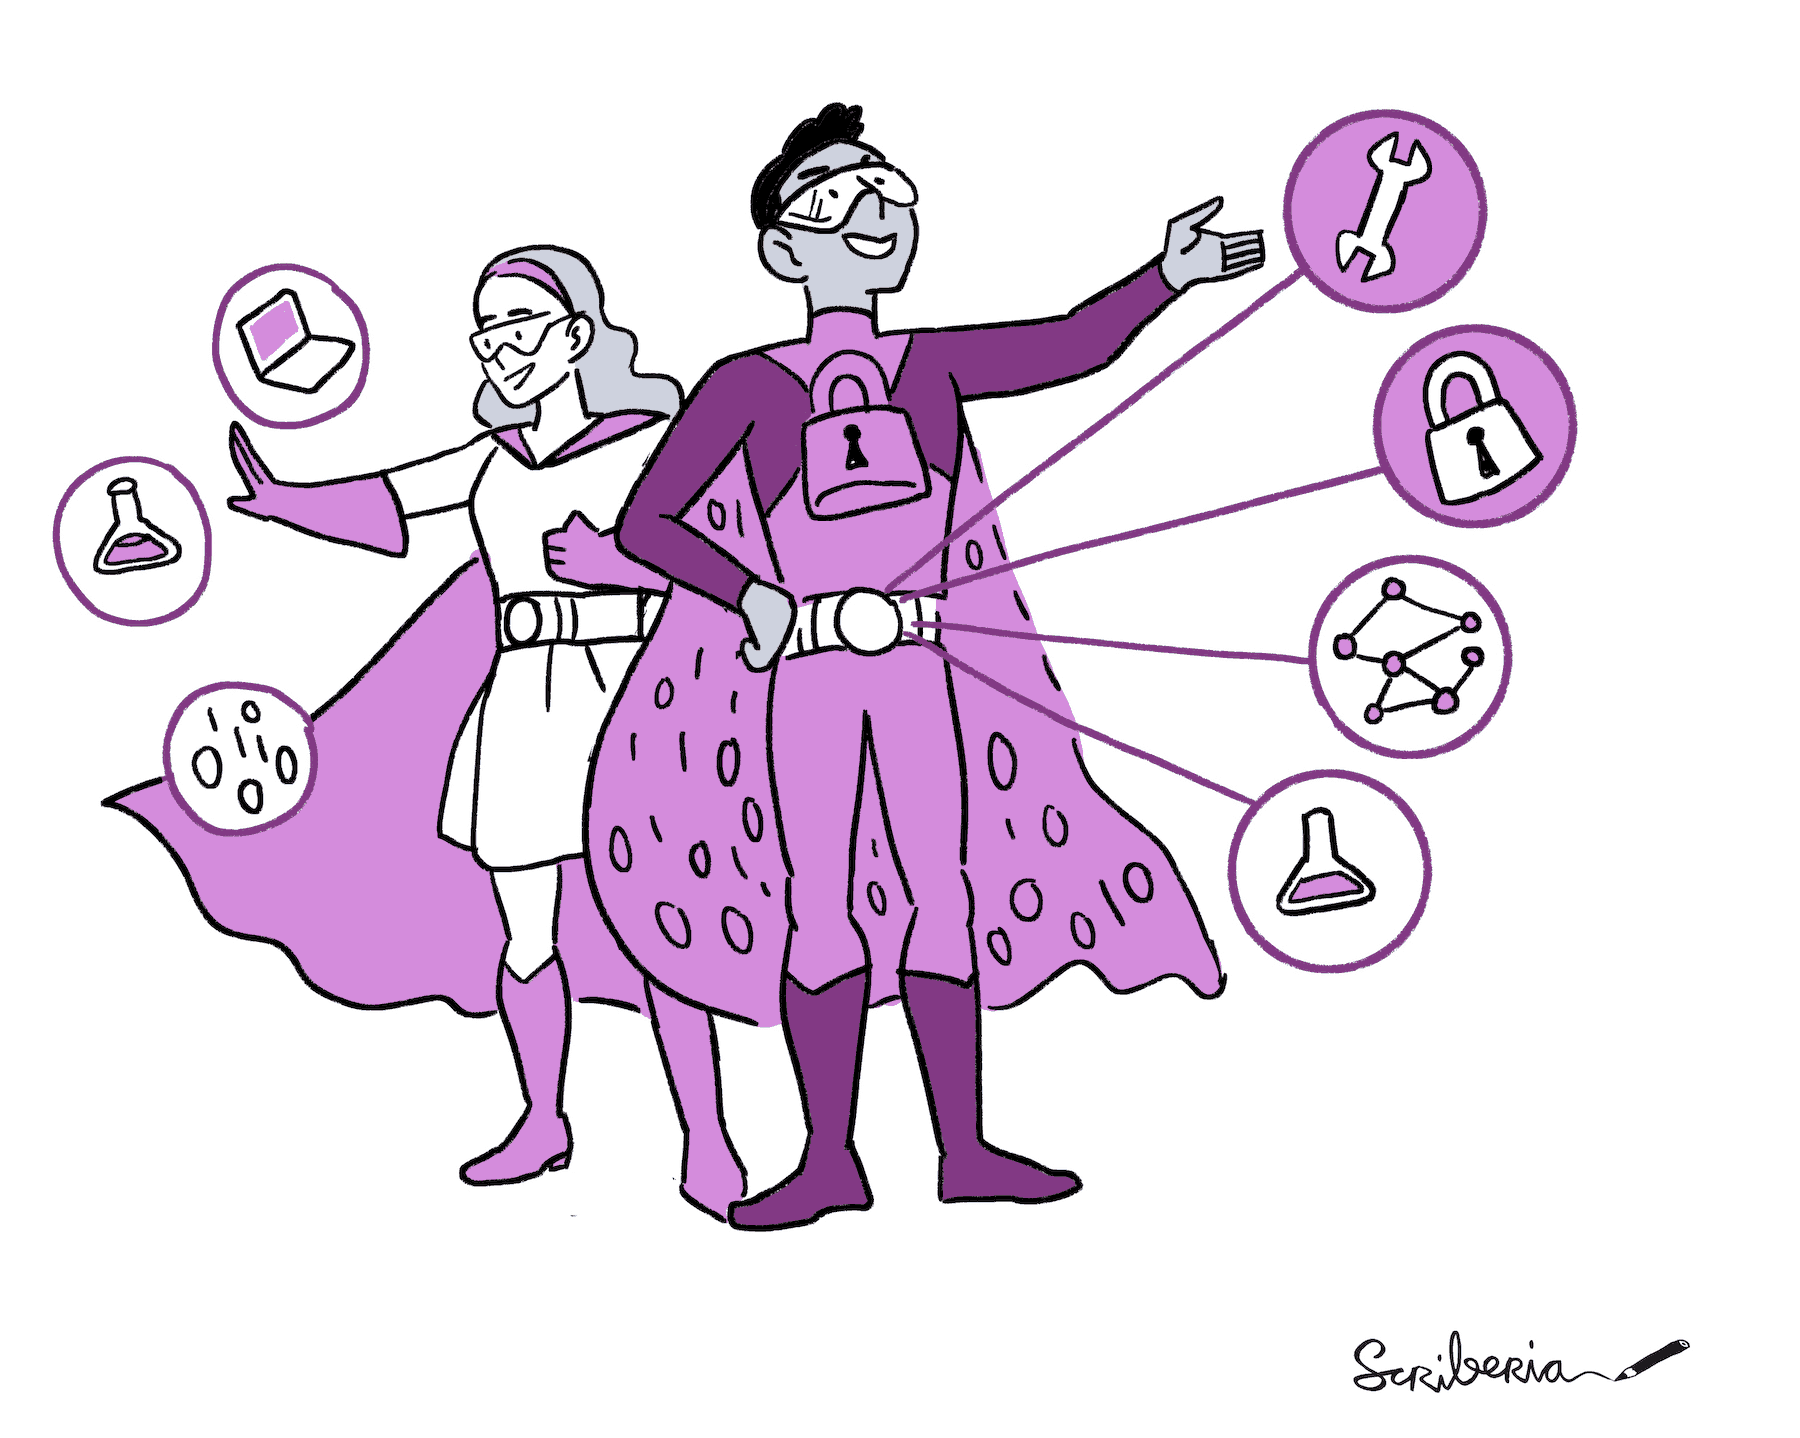 Black, white, grey and purple, cartoon-like sketch of two characters depicted as data stewards in superhero attire, with the left figure gesturing towards symbols of knowledge and alert, and the right figure pointing to tools of the trade such as security and connectivity, all encompassed by a theme of data management and protection.